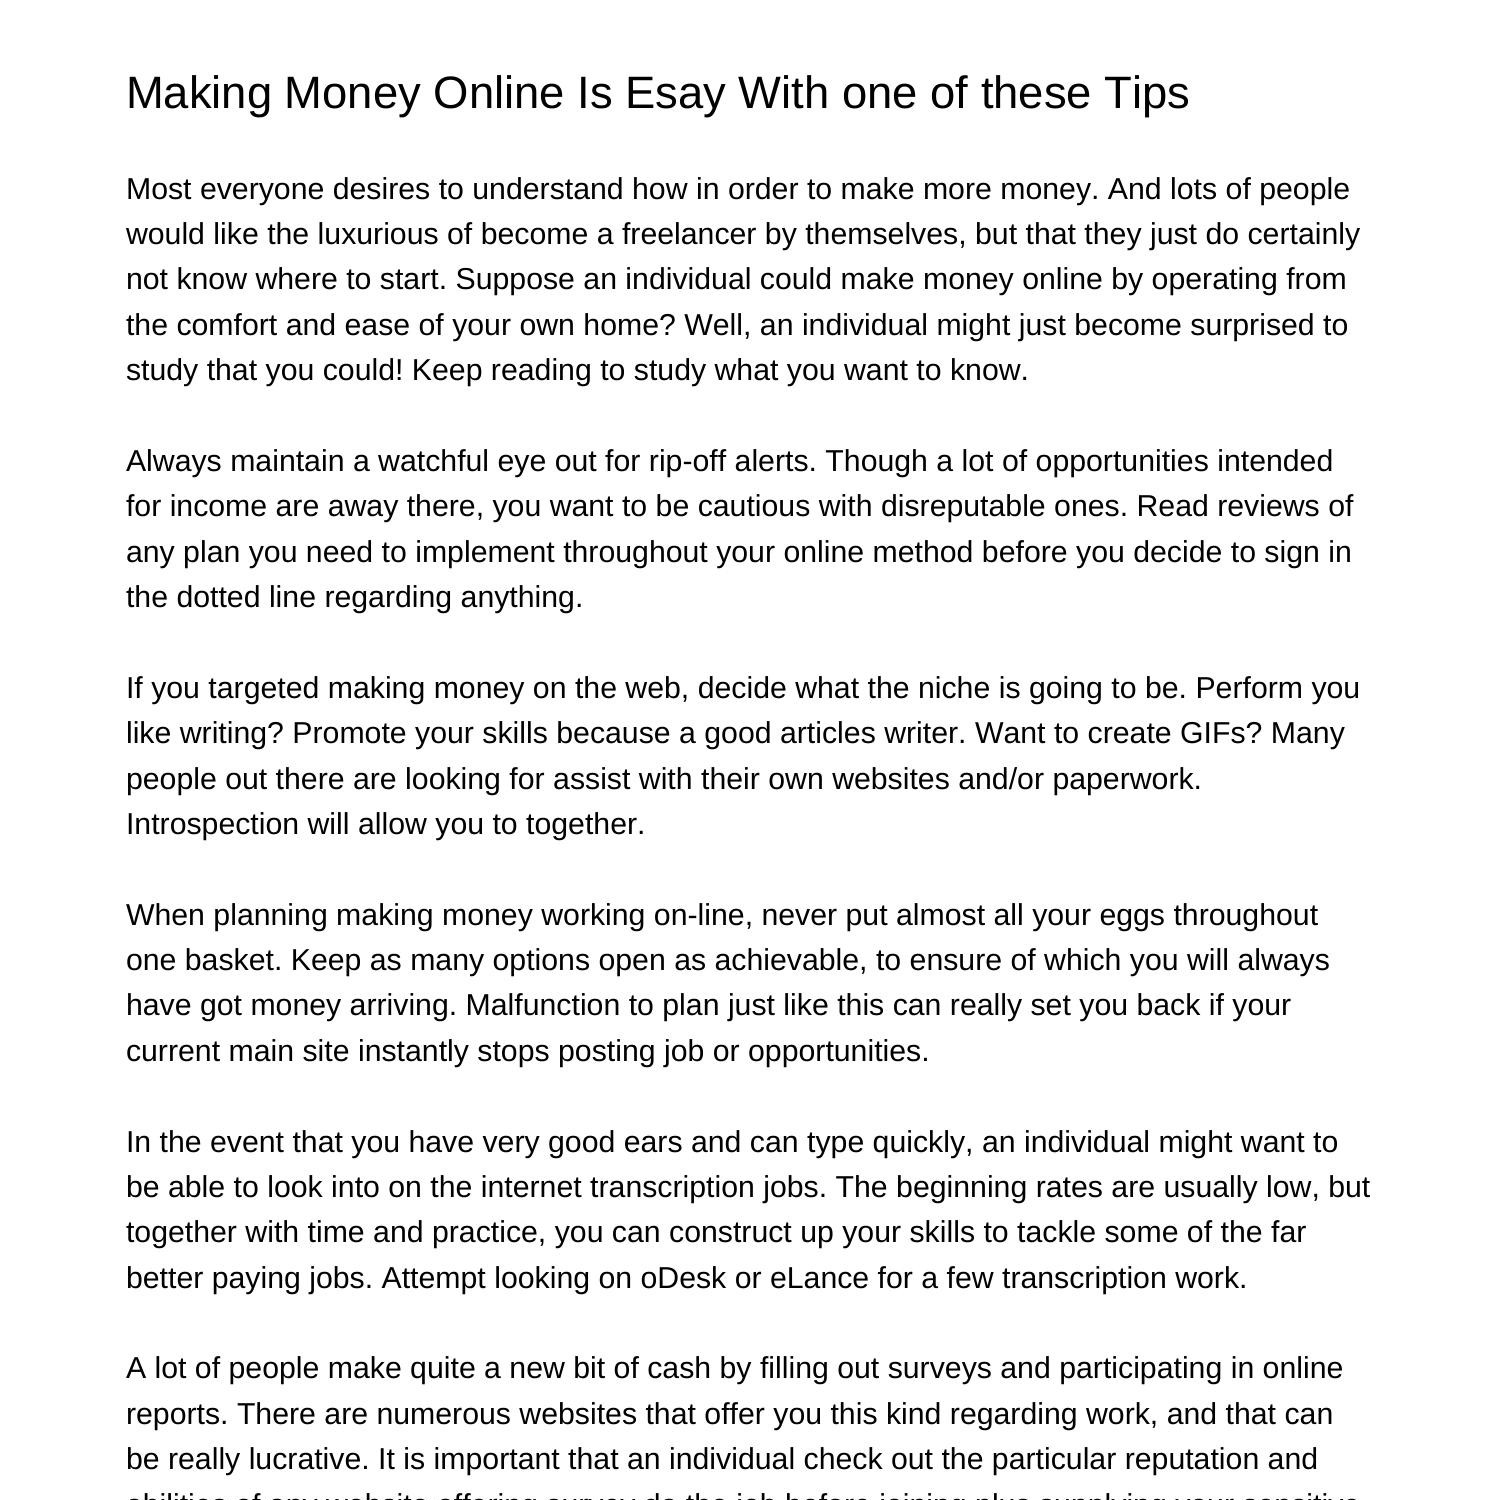 Making Money Online Is Esay Using these Tipsndgur.pdf.pdf DocDroid